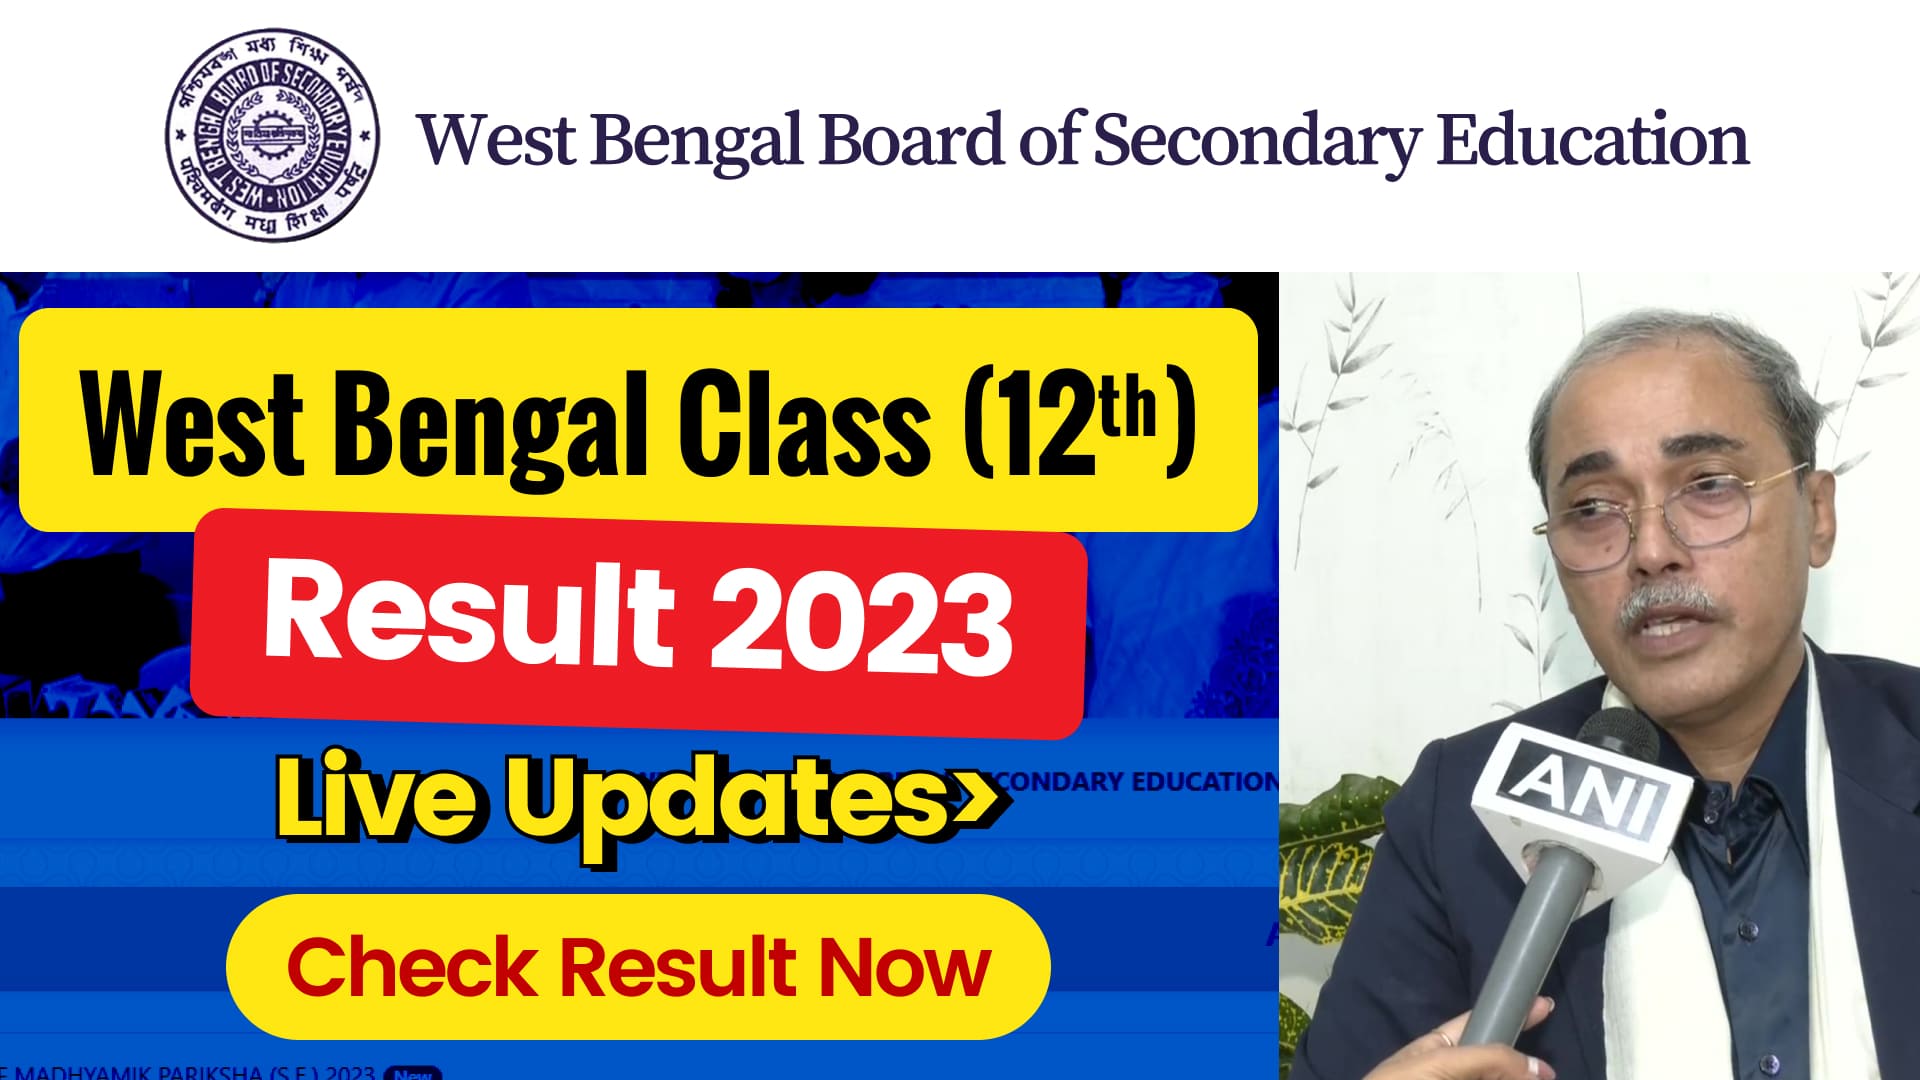 West Bengal Board Higher Secondary (12th) Result 2023 - Live Updates